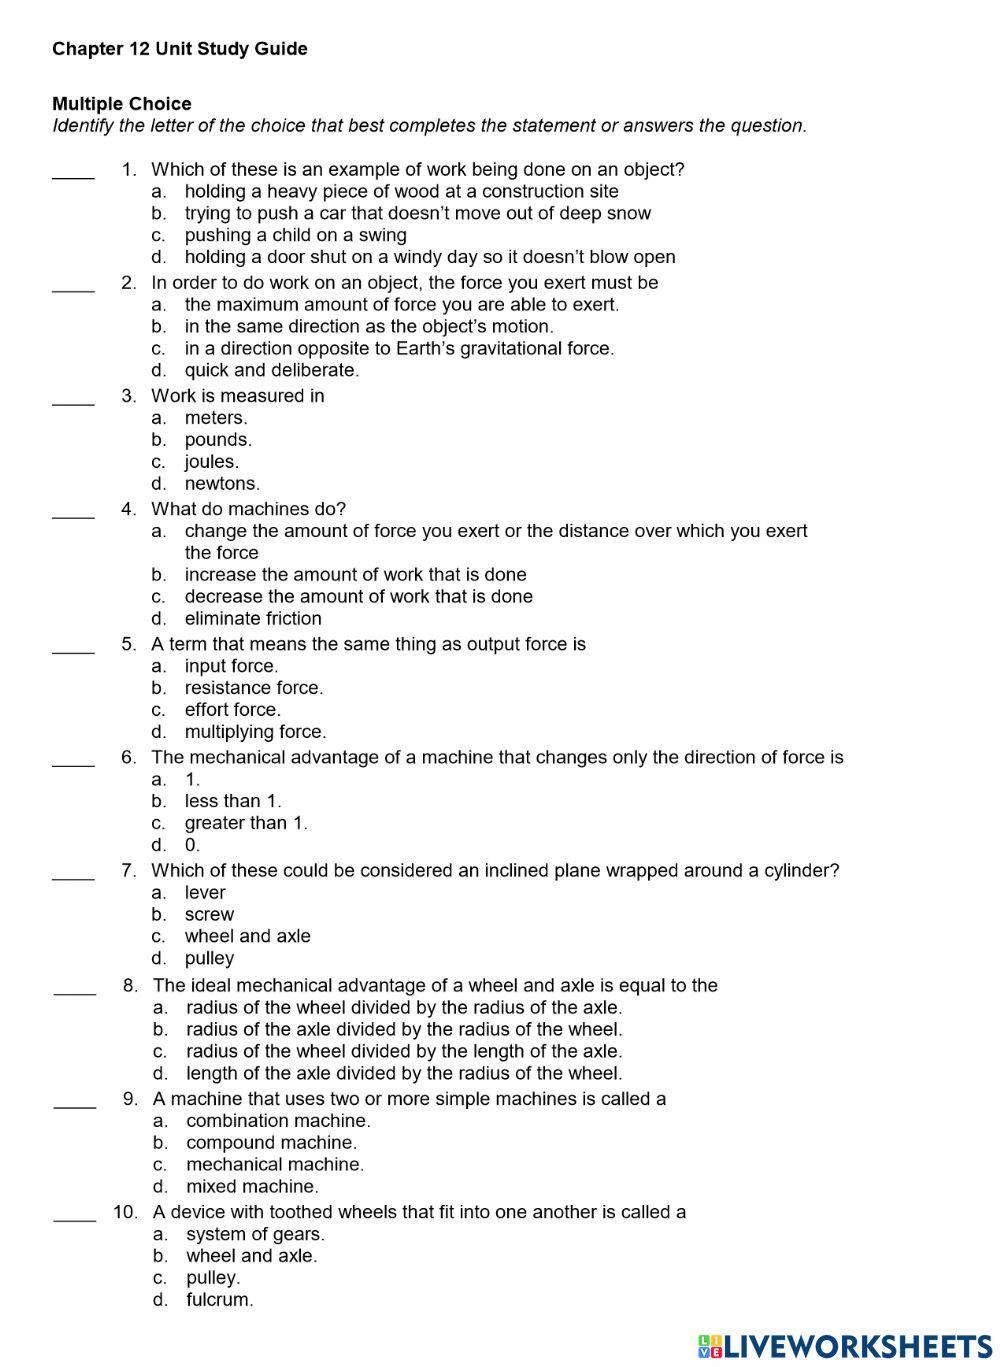 PS-12-Unit Study Guide page 1